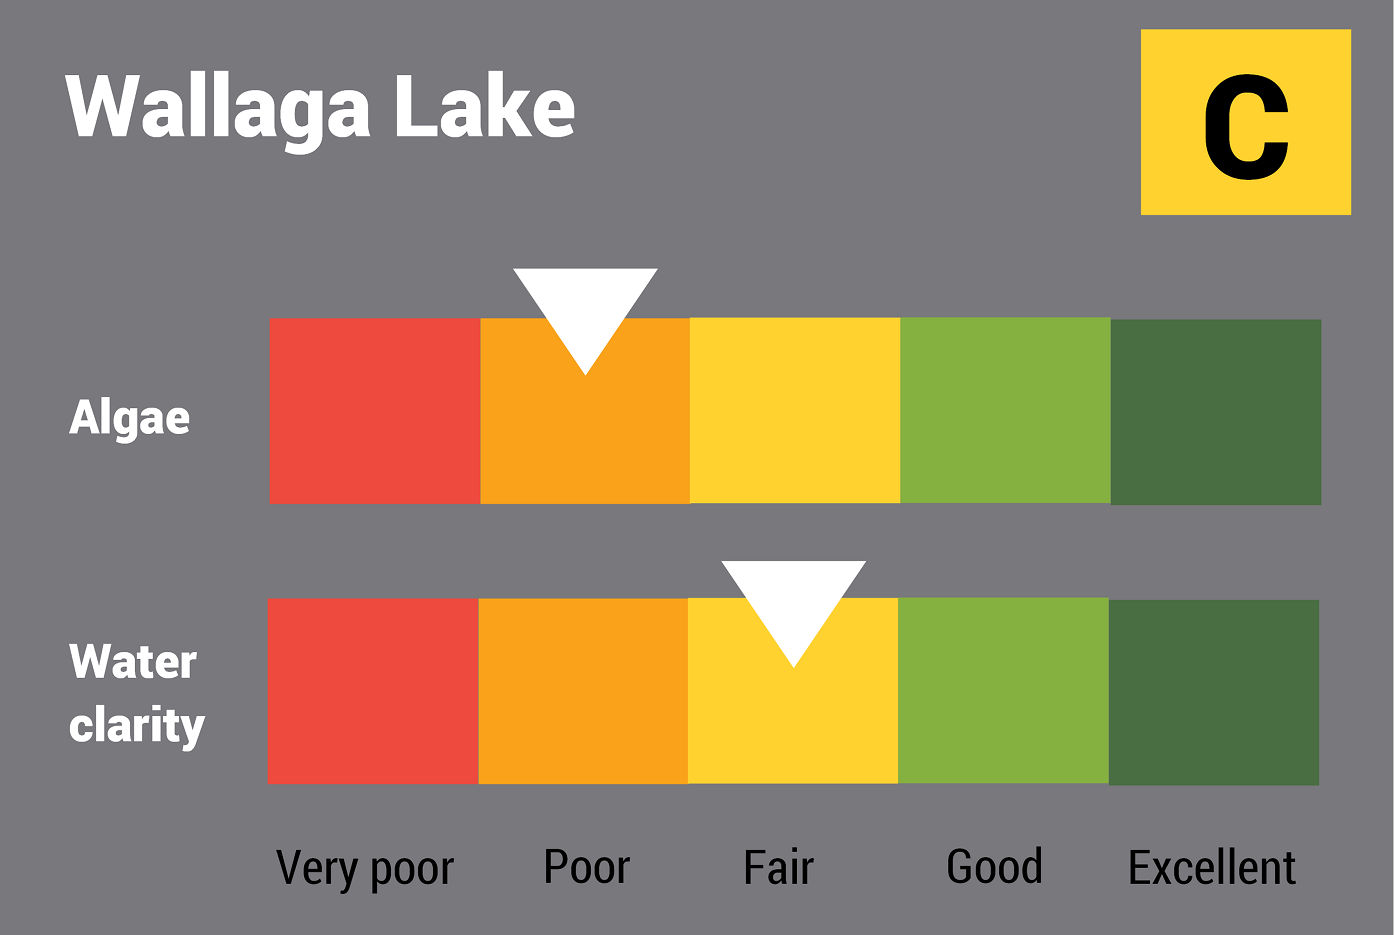 Wallaga Lake water quality report card for algae and water clarity showing colour-coded ratings (red, orange, yellow, light green and dark green, which represent very poor, poor, fair, good and excellent, respectively). Algae is rated 'poor' and water clarity is rated 'fair' giving an overall rating of 'fair' or 'C'.